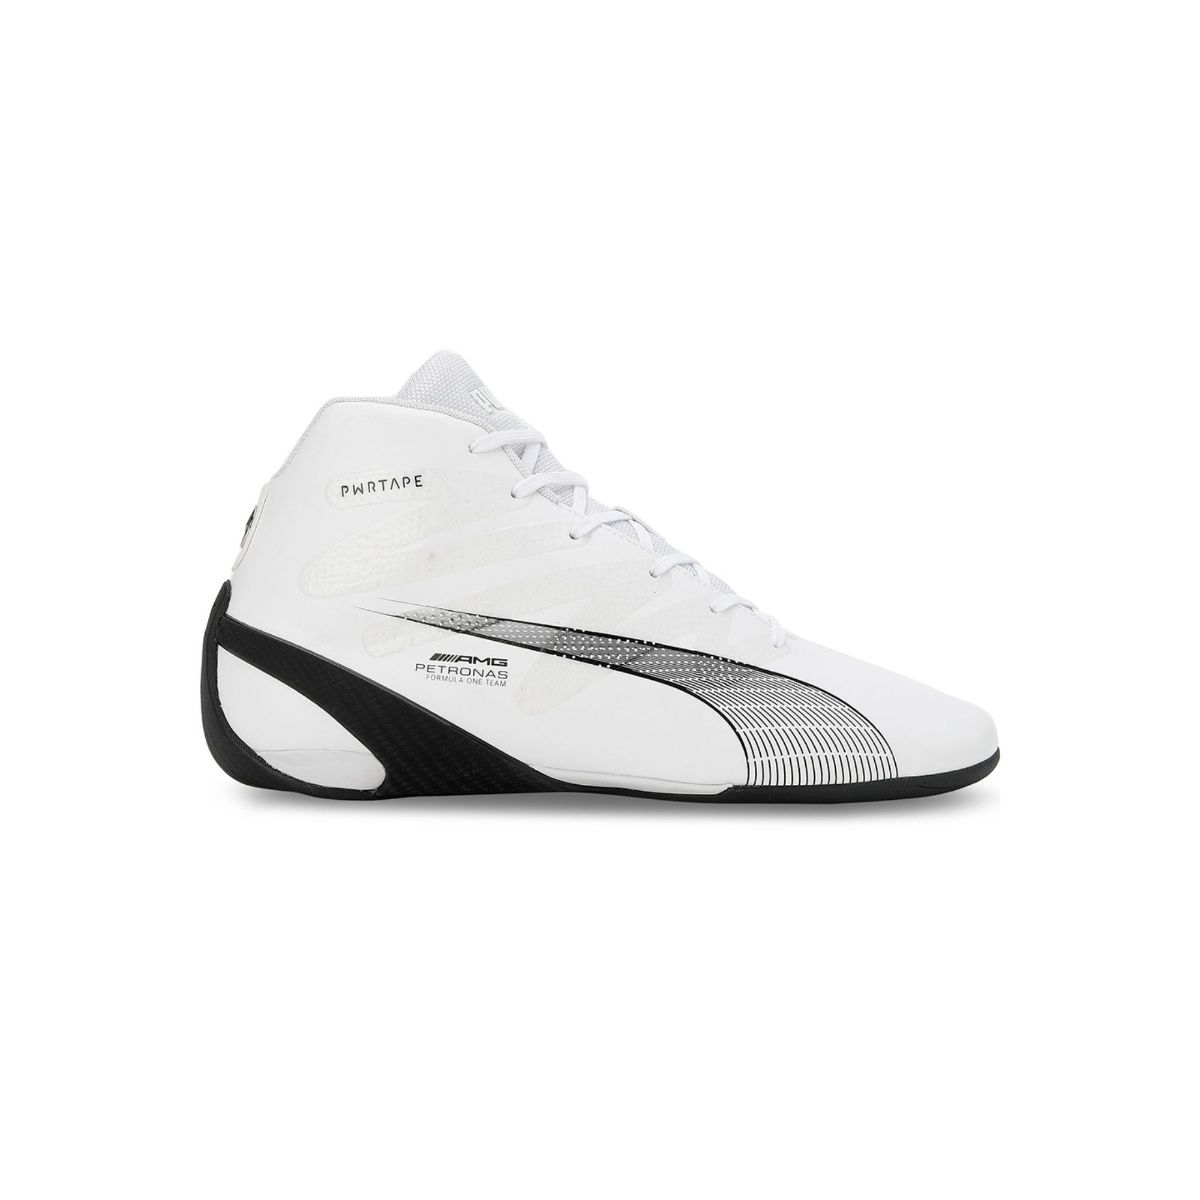 Puma Mercedes Shoe Collection Online at Best Price in India | Tata CLiQ